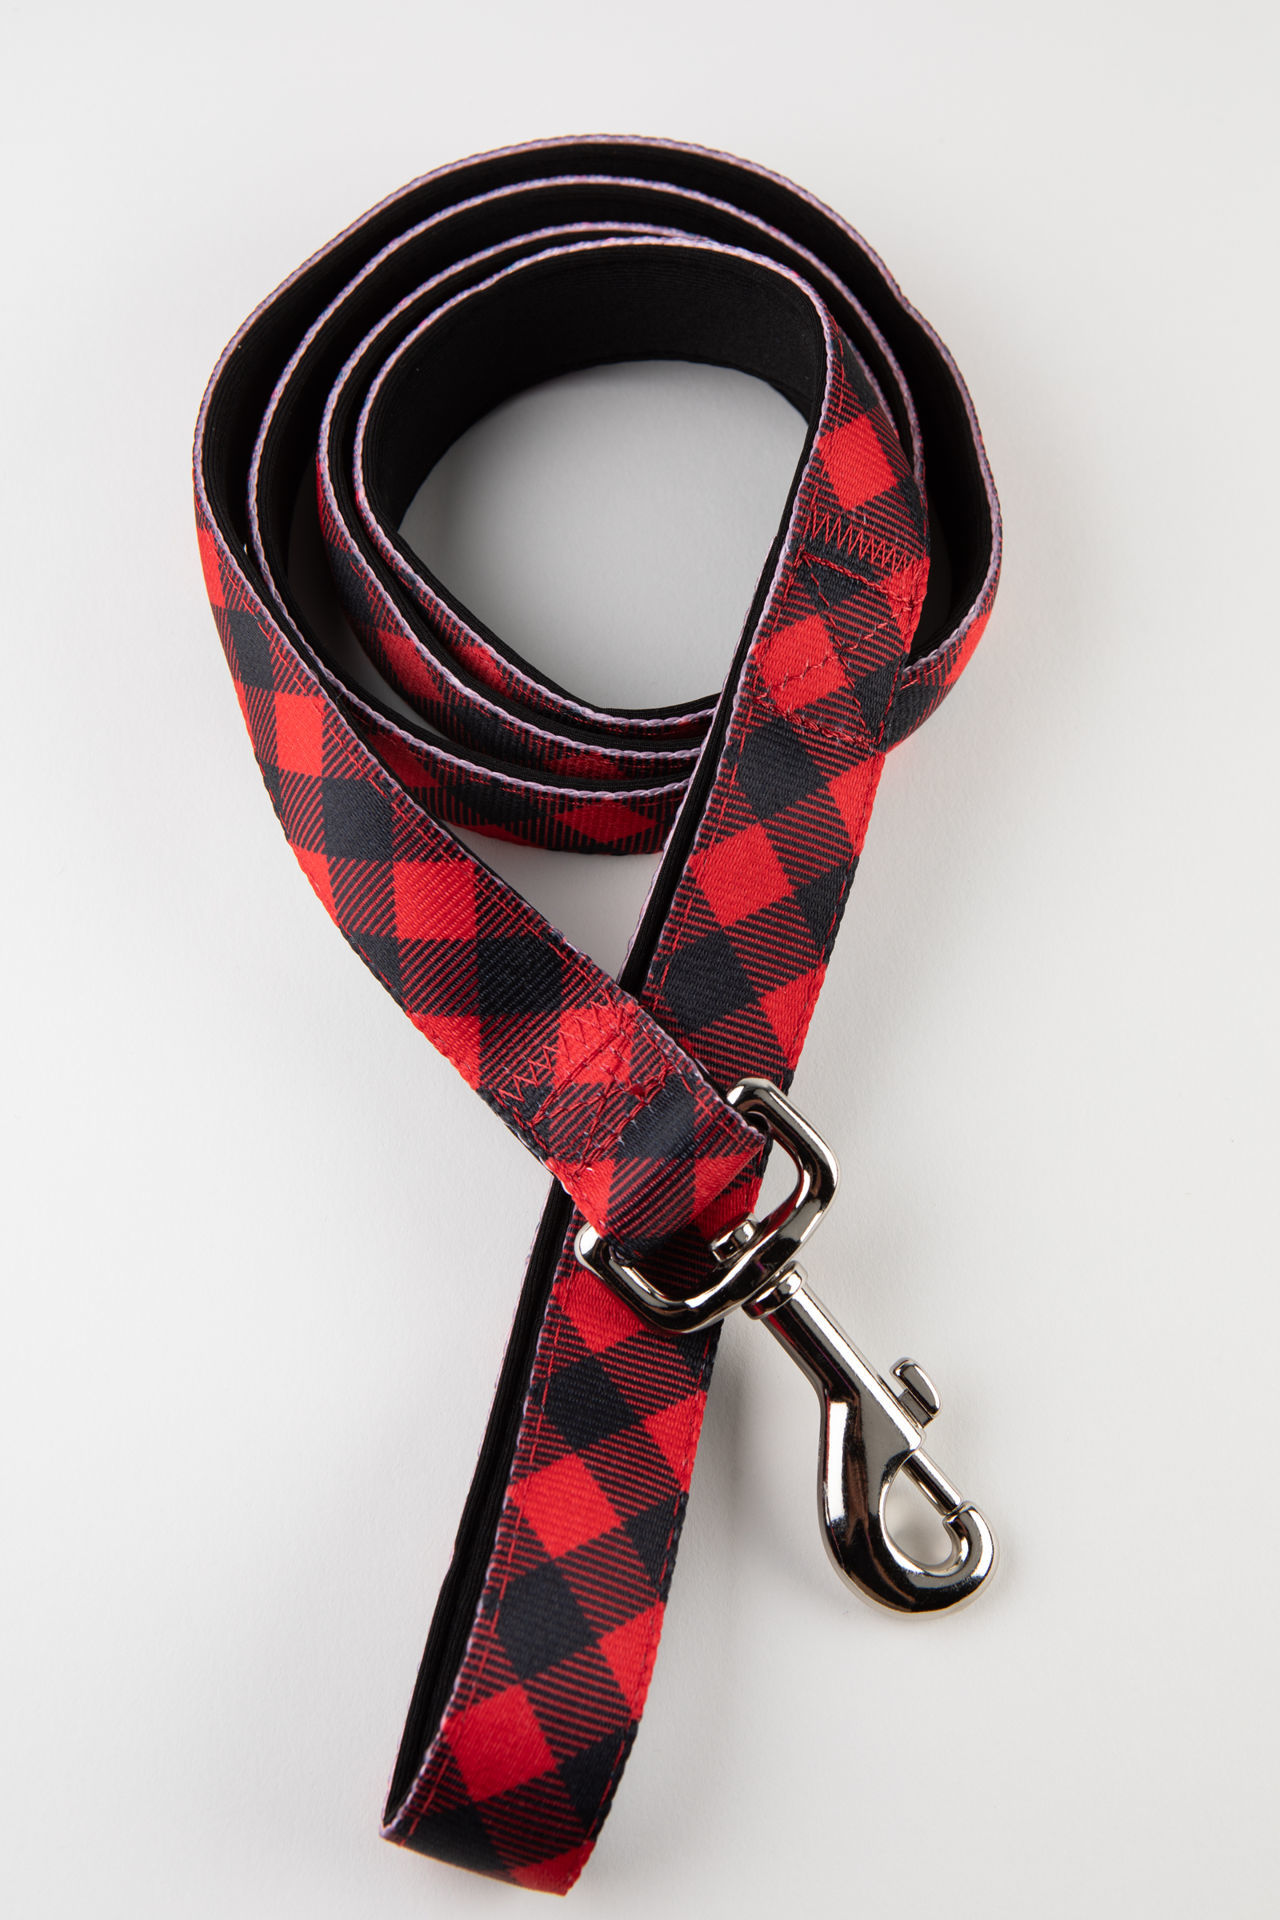 Picture of Leash 1" X 5' - Buffalo  Check Red/Black